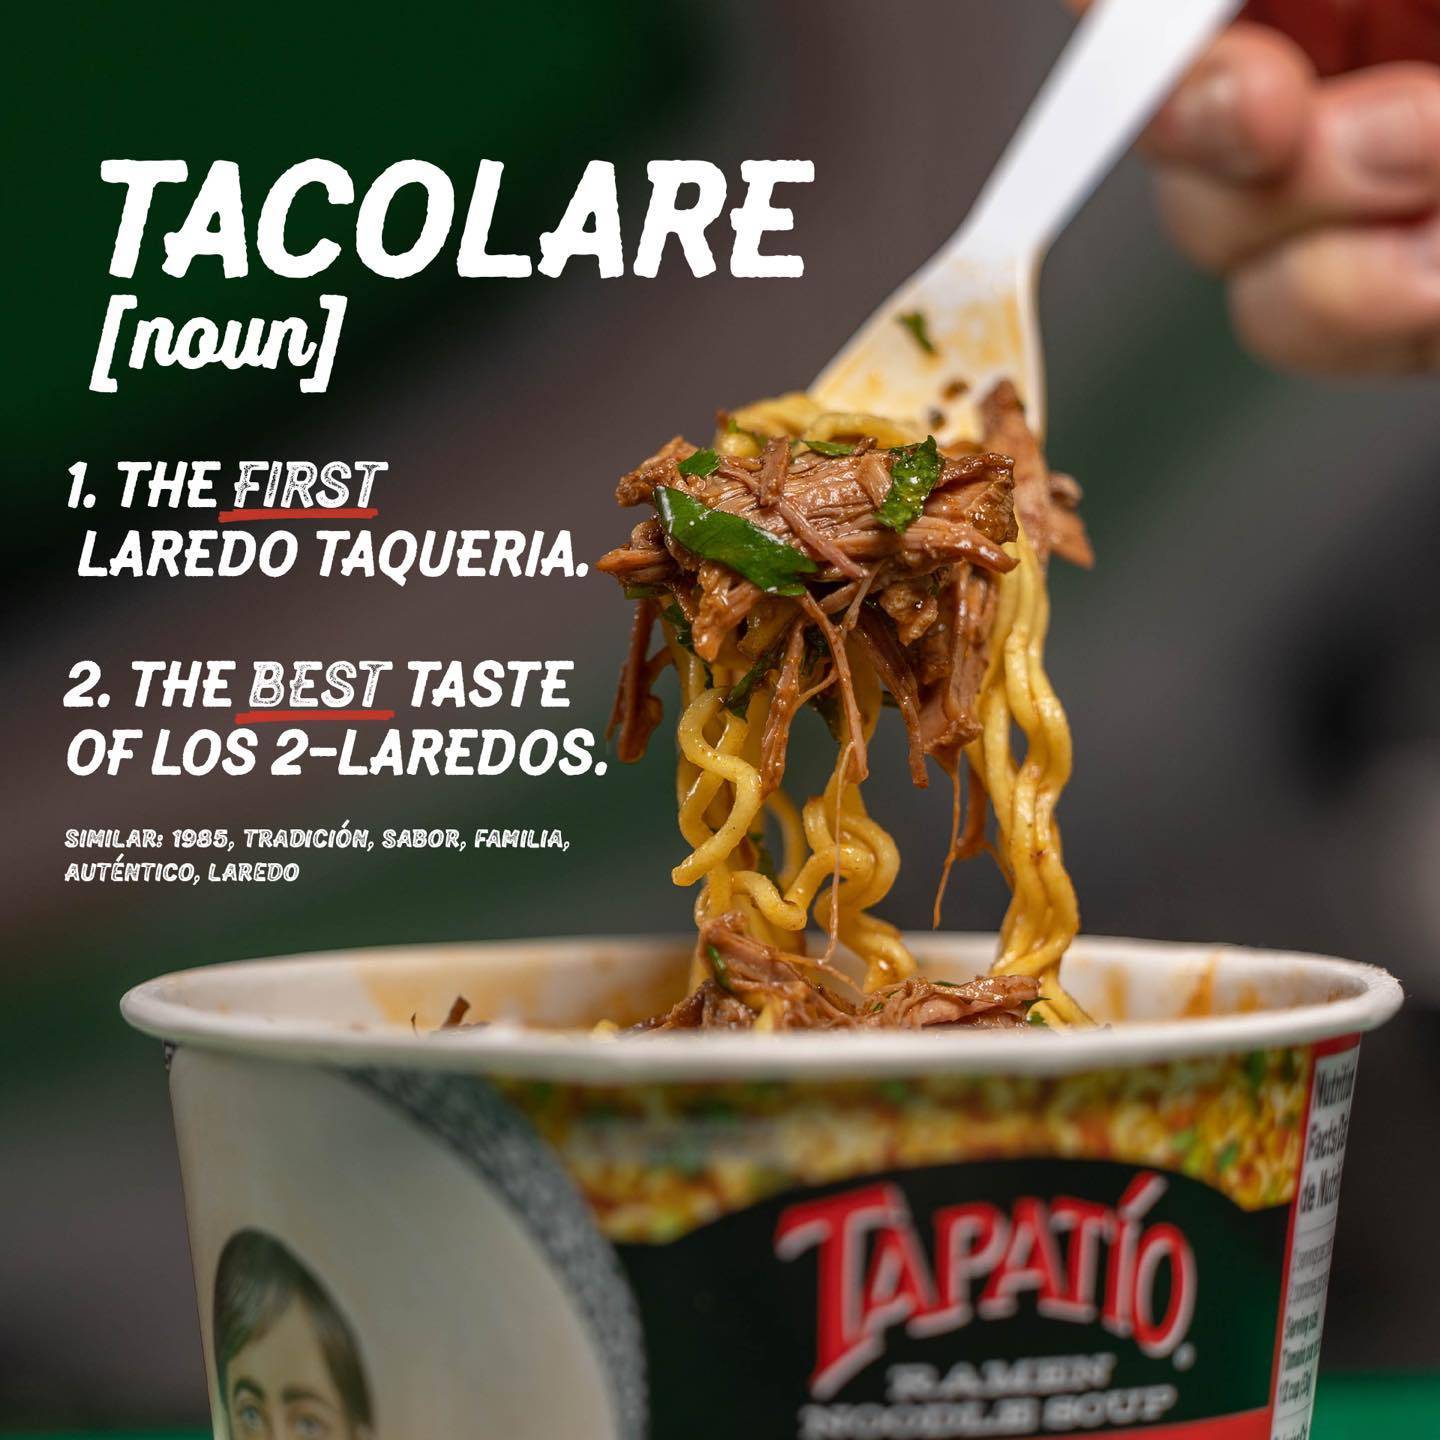 Tacolare Food Truck